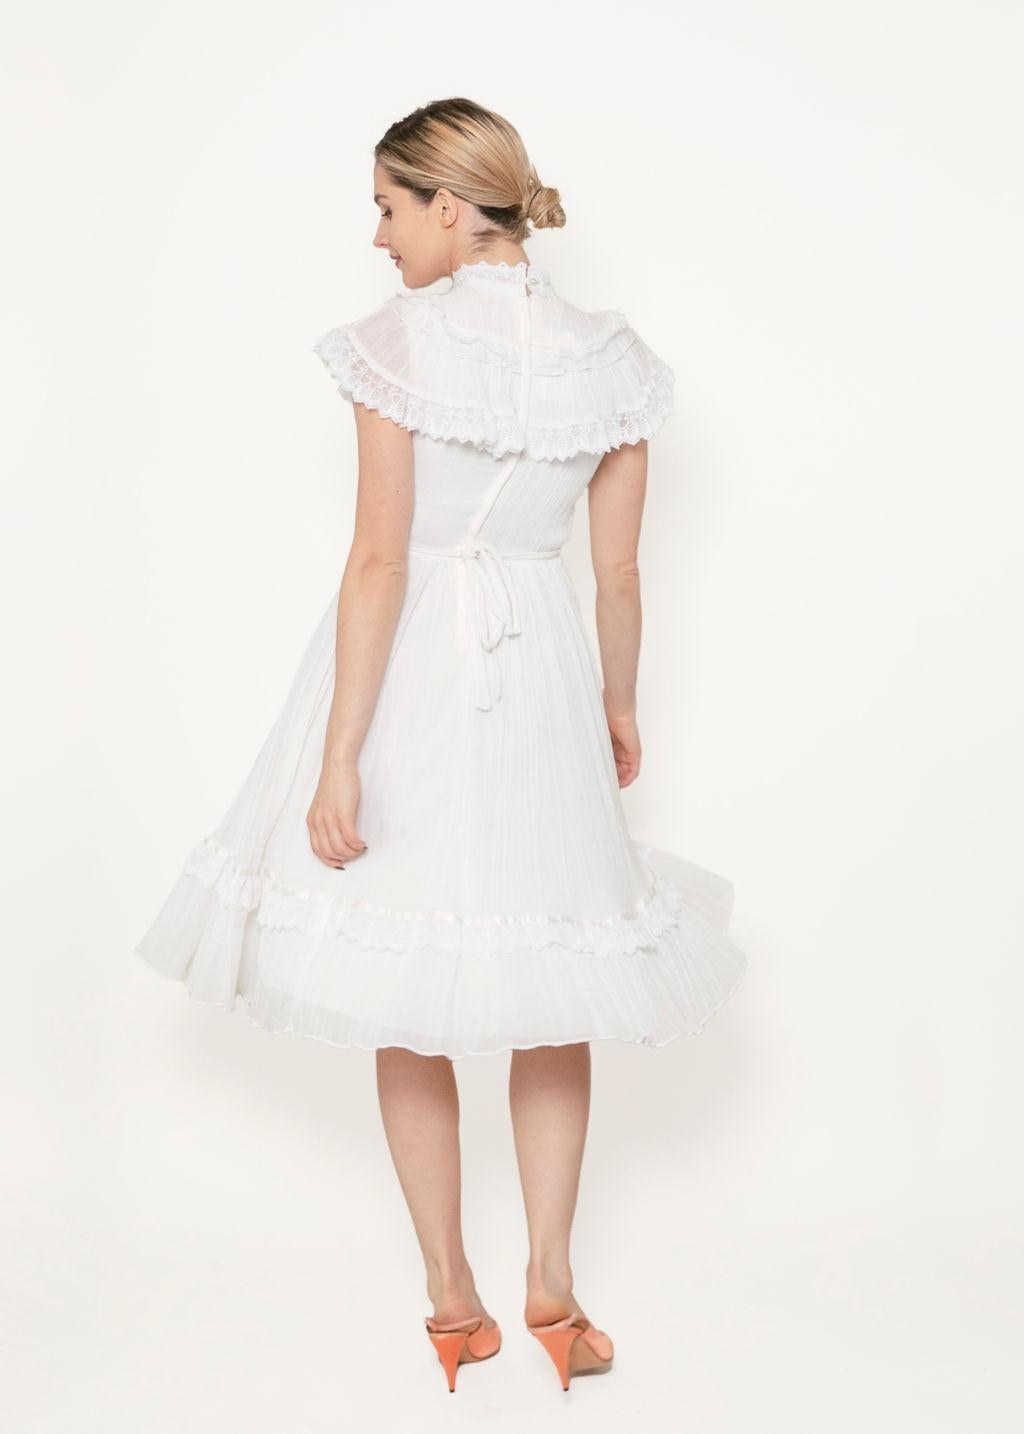 This Gunne Sax lace dress takes your wardrobe back to the Victorian era, with a fully lined, babydoll-style silhouette and a high ruffled neck. The rear zipper ensures a snug fit, perfect for creating a classic, timeless look. 

In great vintage